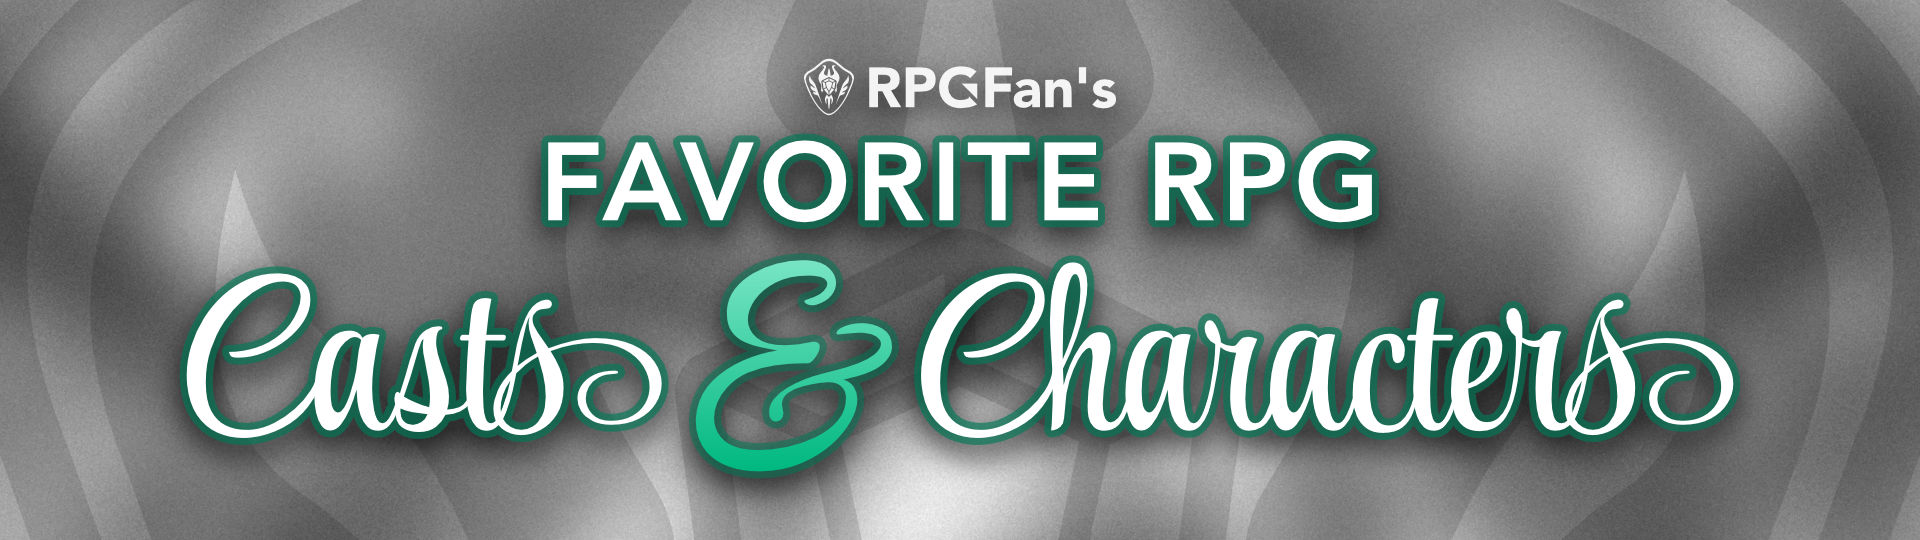 Favorite RPG Casts & Characters